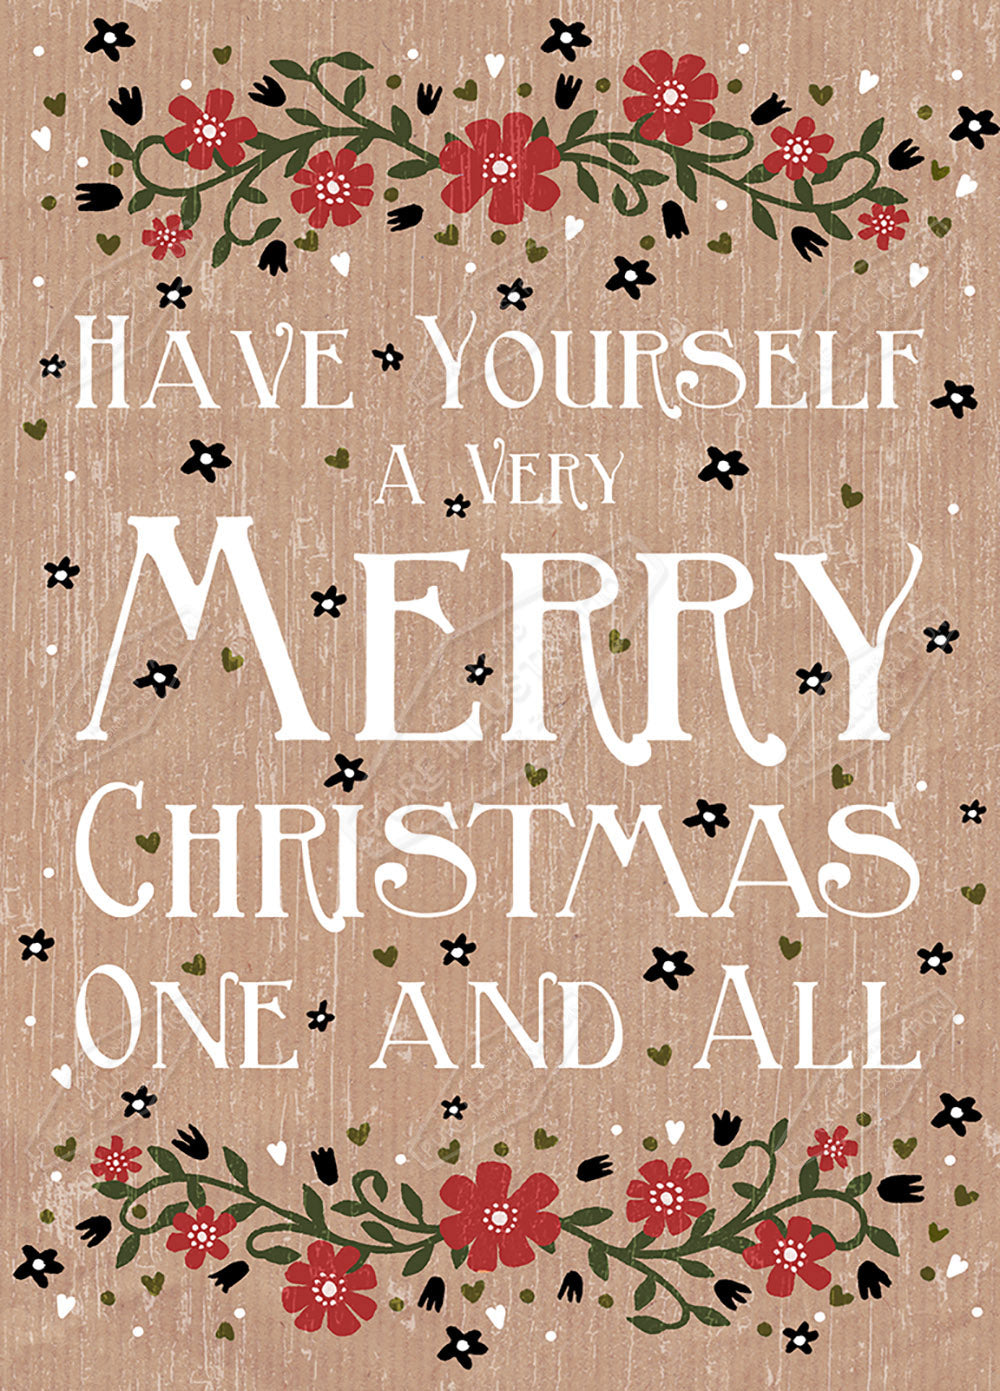 00024233SSN- Sian Summerhayes is represented by Pure Art Licensing Agency - Christmas Greeting Card Design